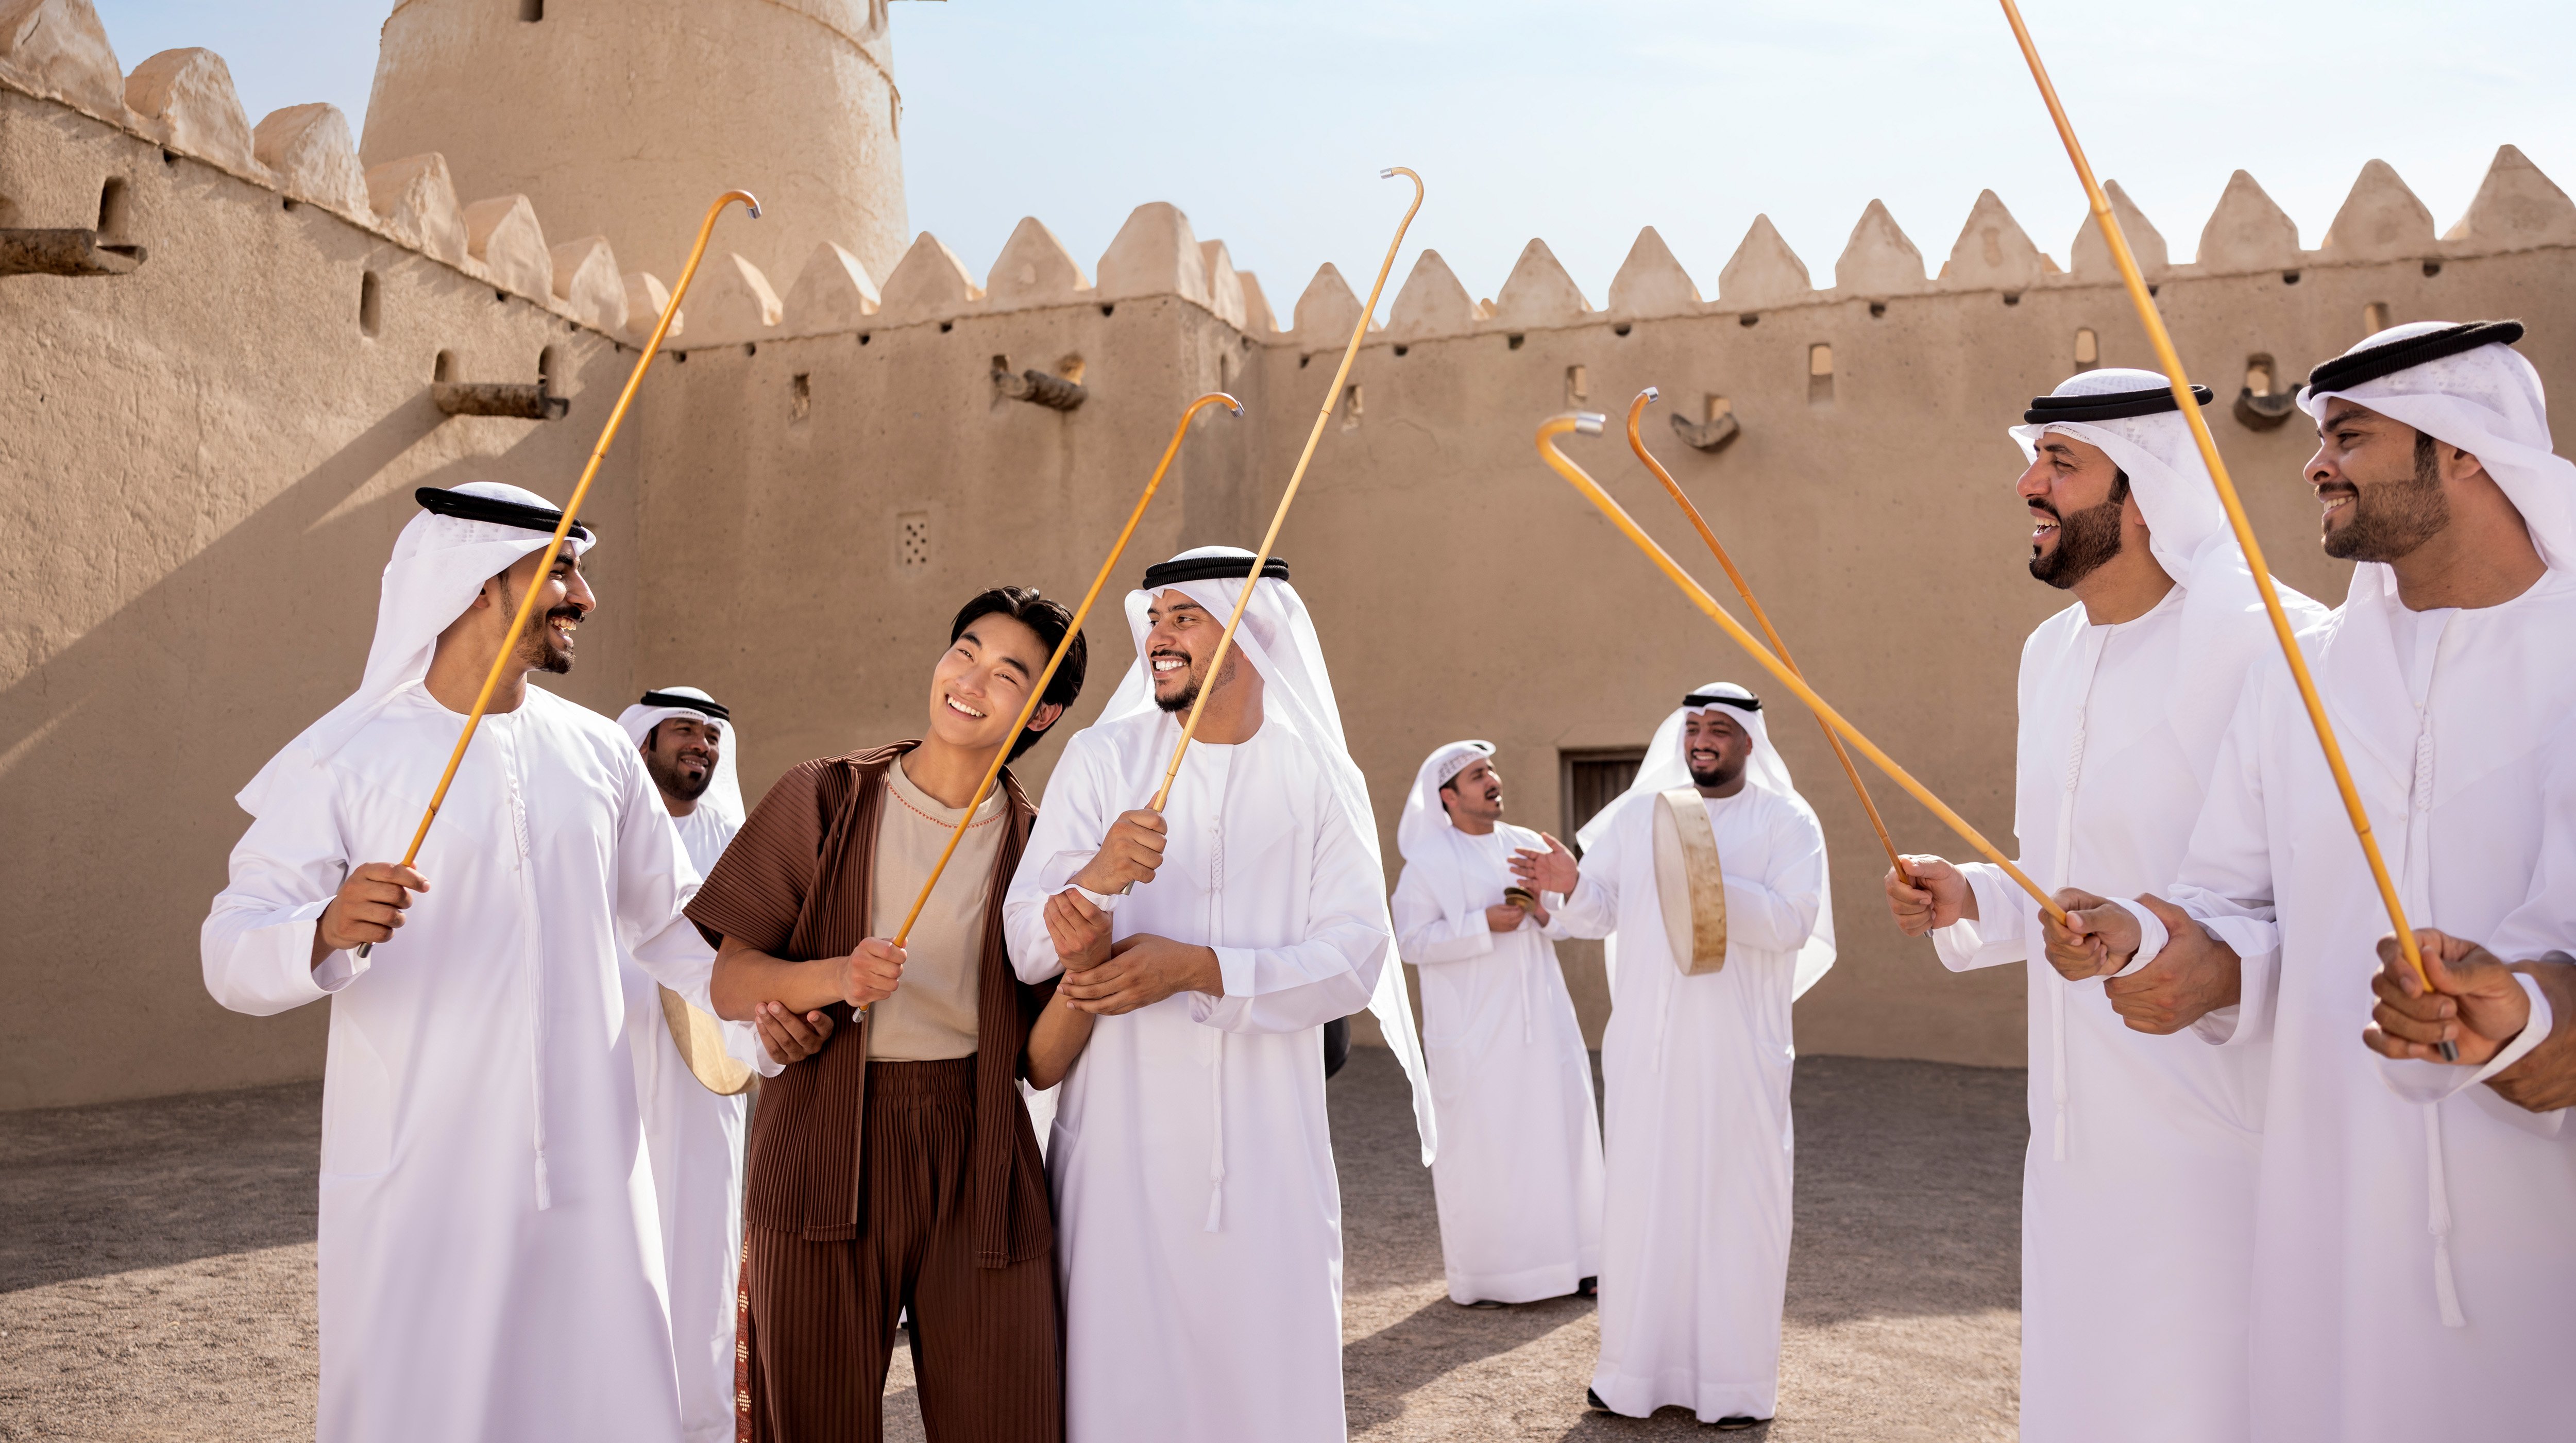 Be inspired by Abu Dhabi's culture